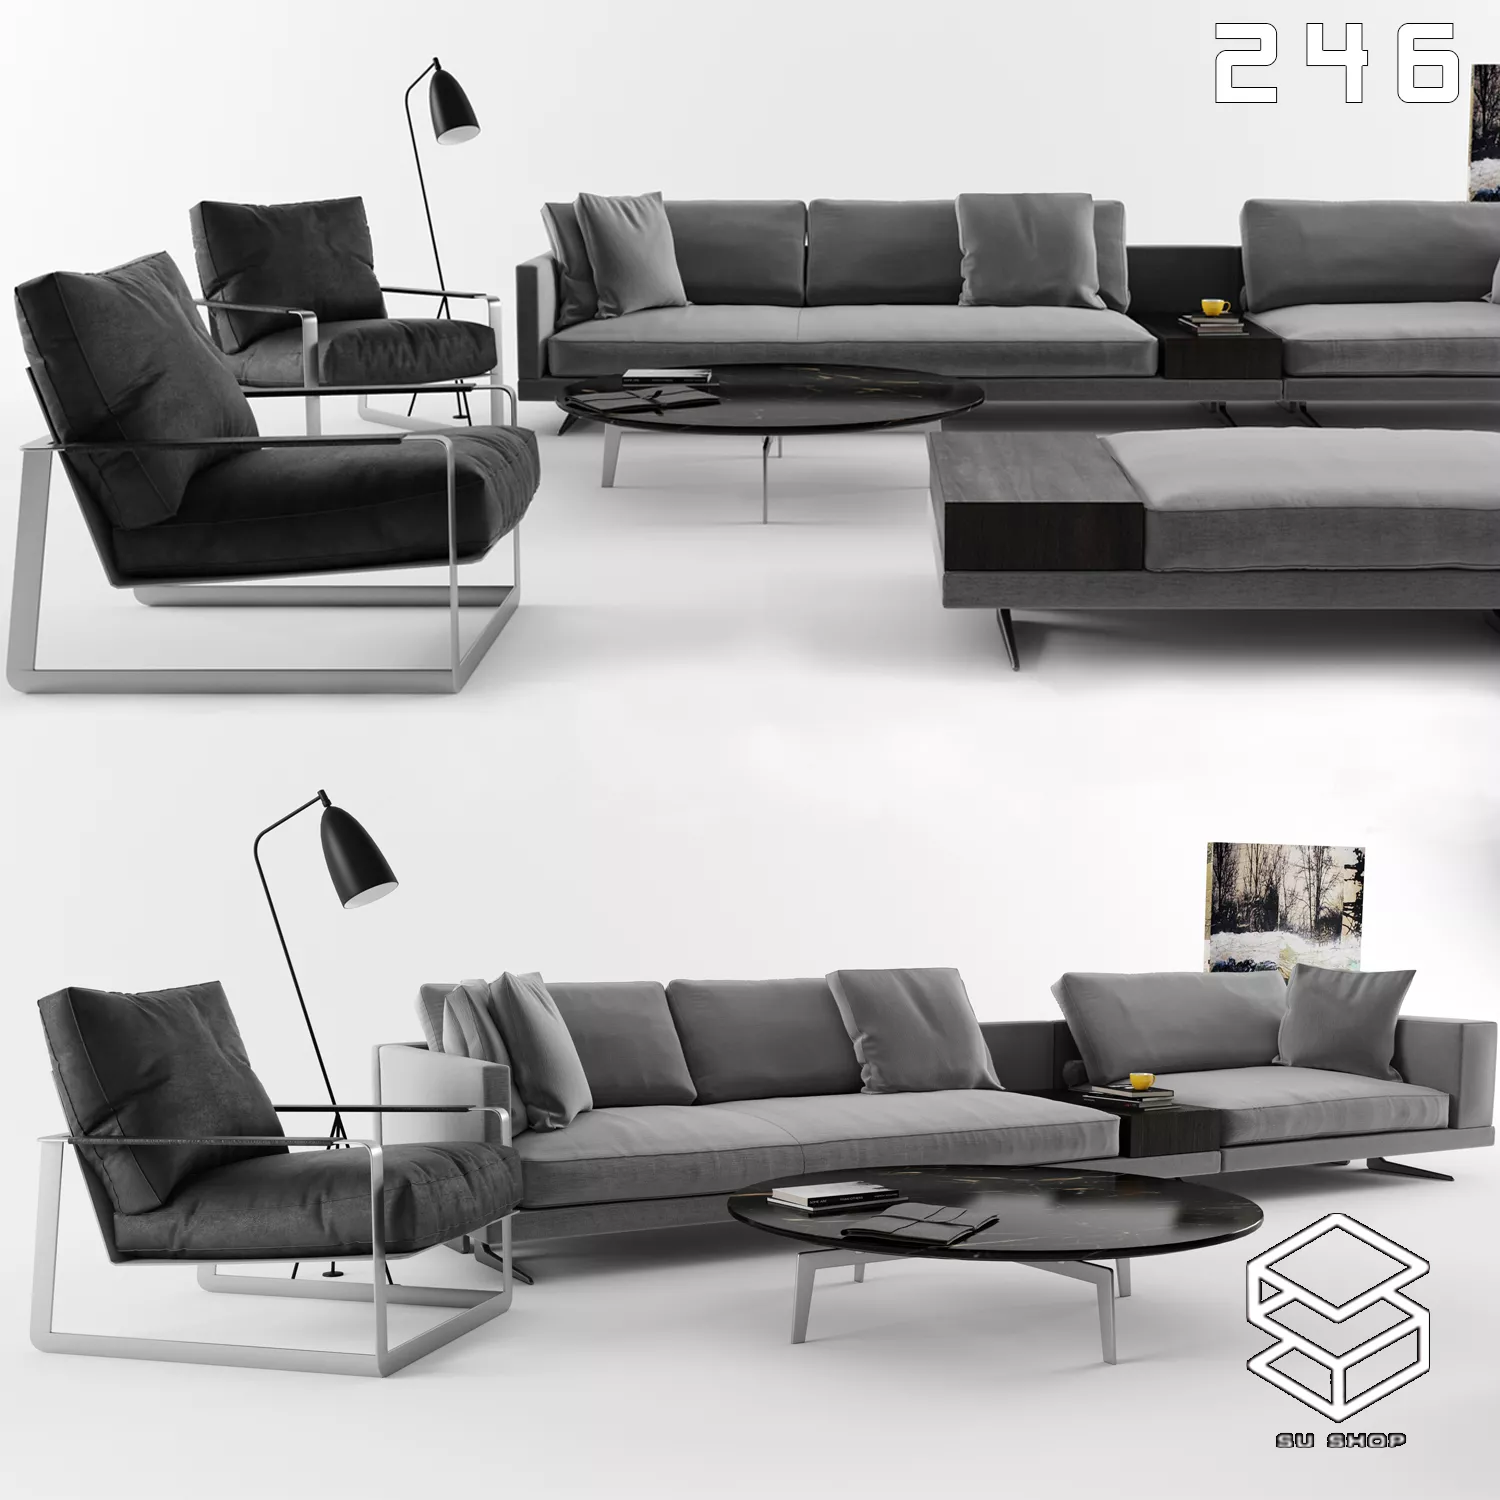 MODERN SOFA - SKETCHUP 3D MODEL - VRAY OR ENSCAPE - ID13548